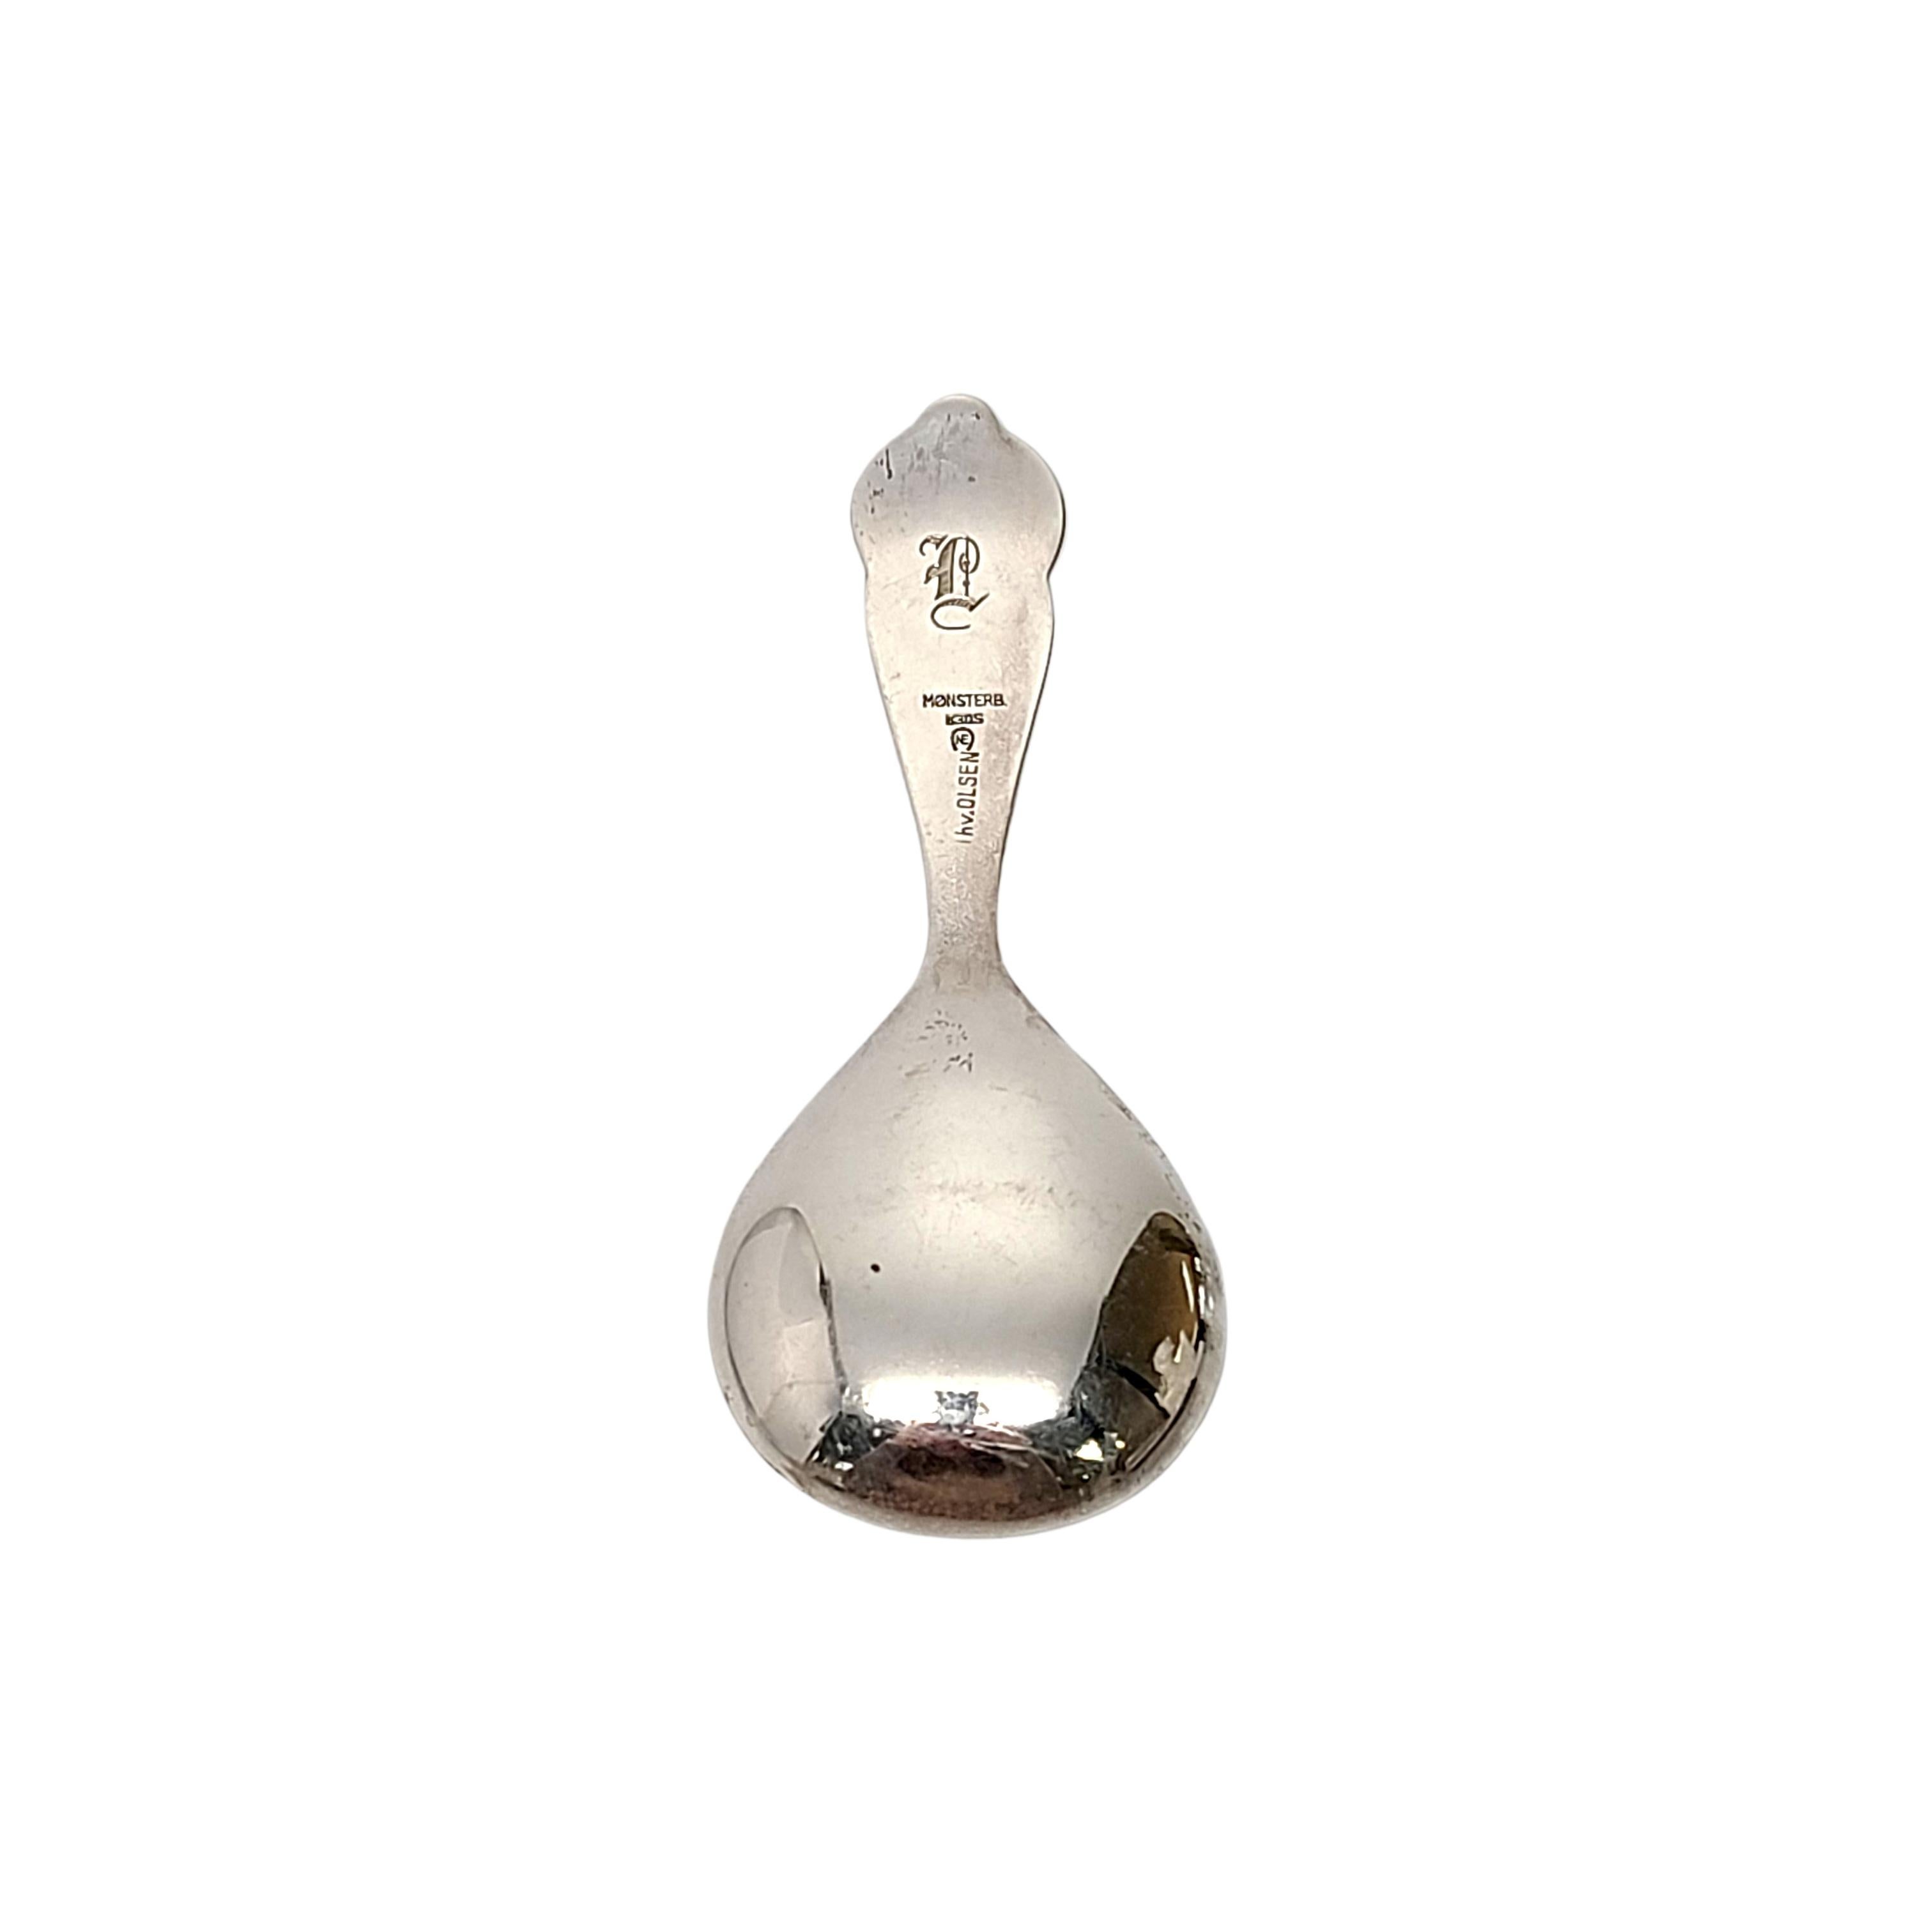 830 silver tea caddy spoons by Nils Erik Elvik of Oslo, Norway.

Monogram on the back of the handle appears to be L

A simple and timeless floral design with dotted edge.

Measures 4 1/8